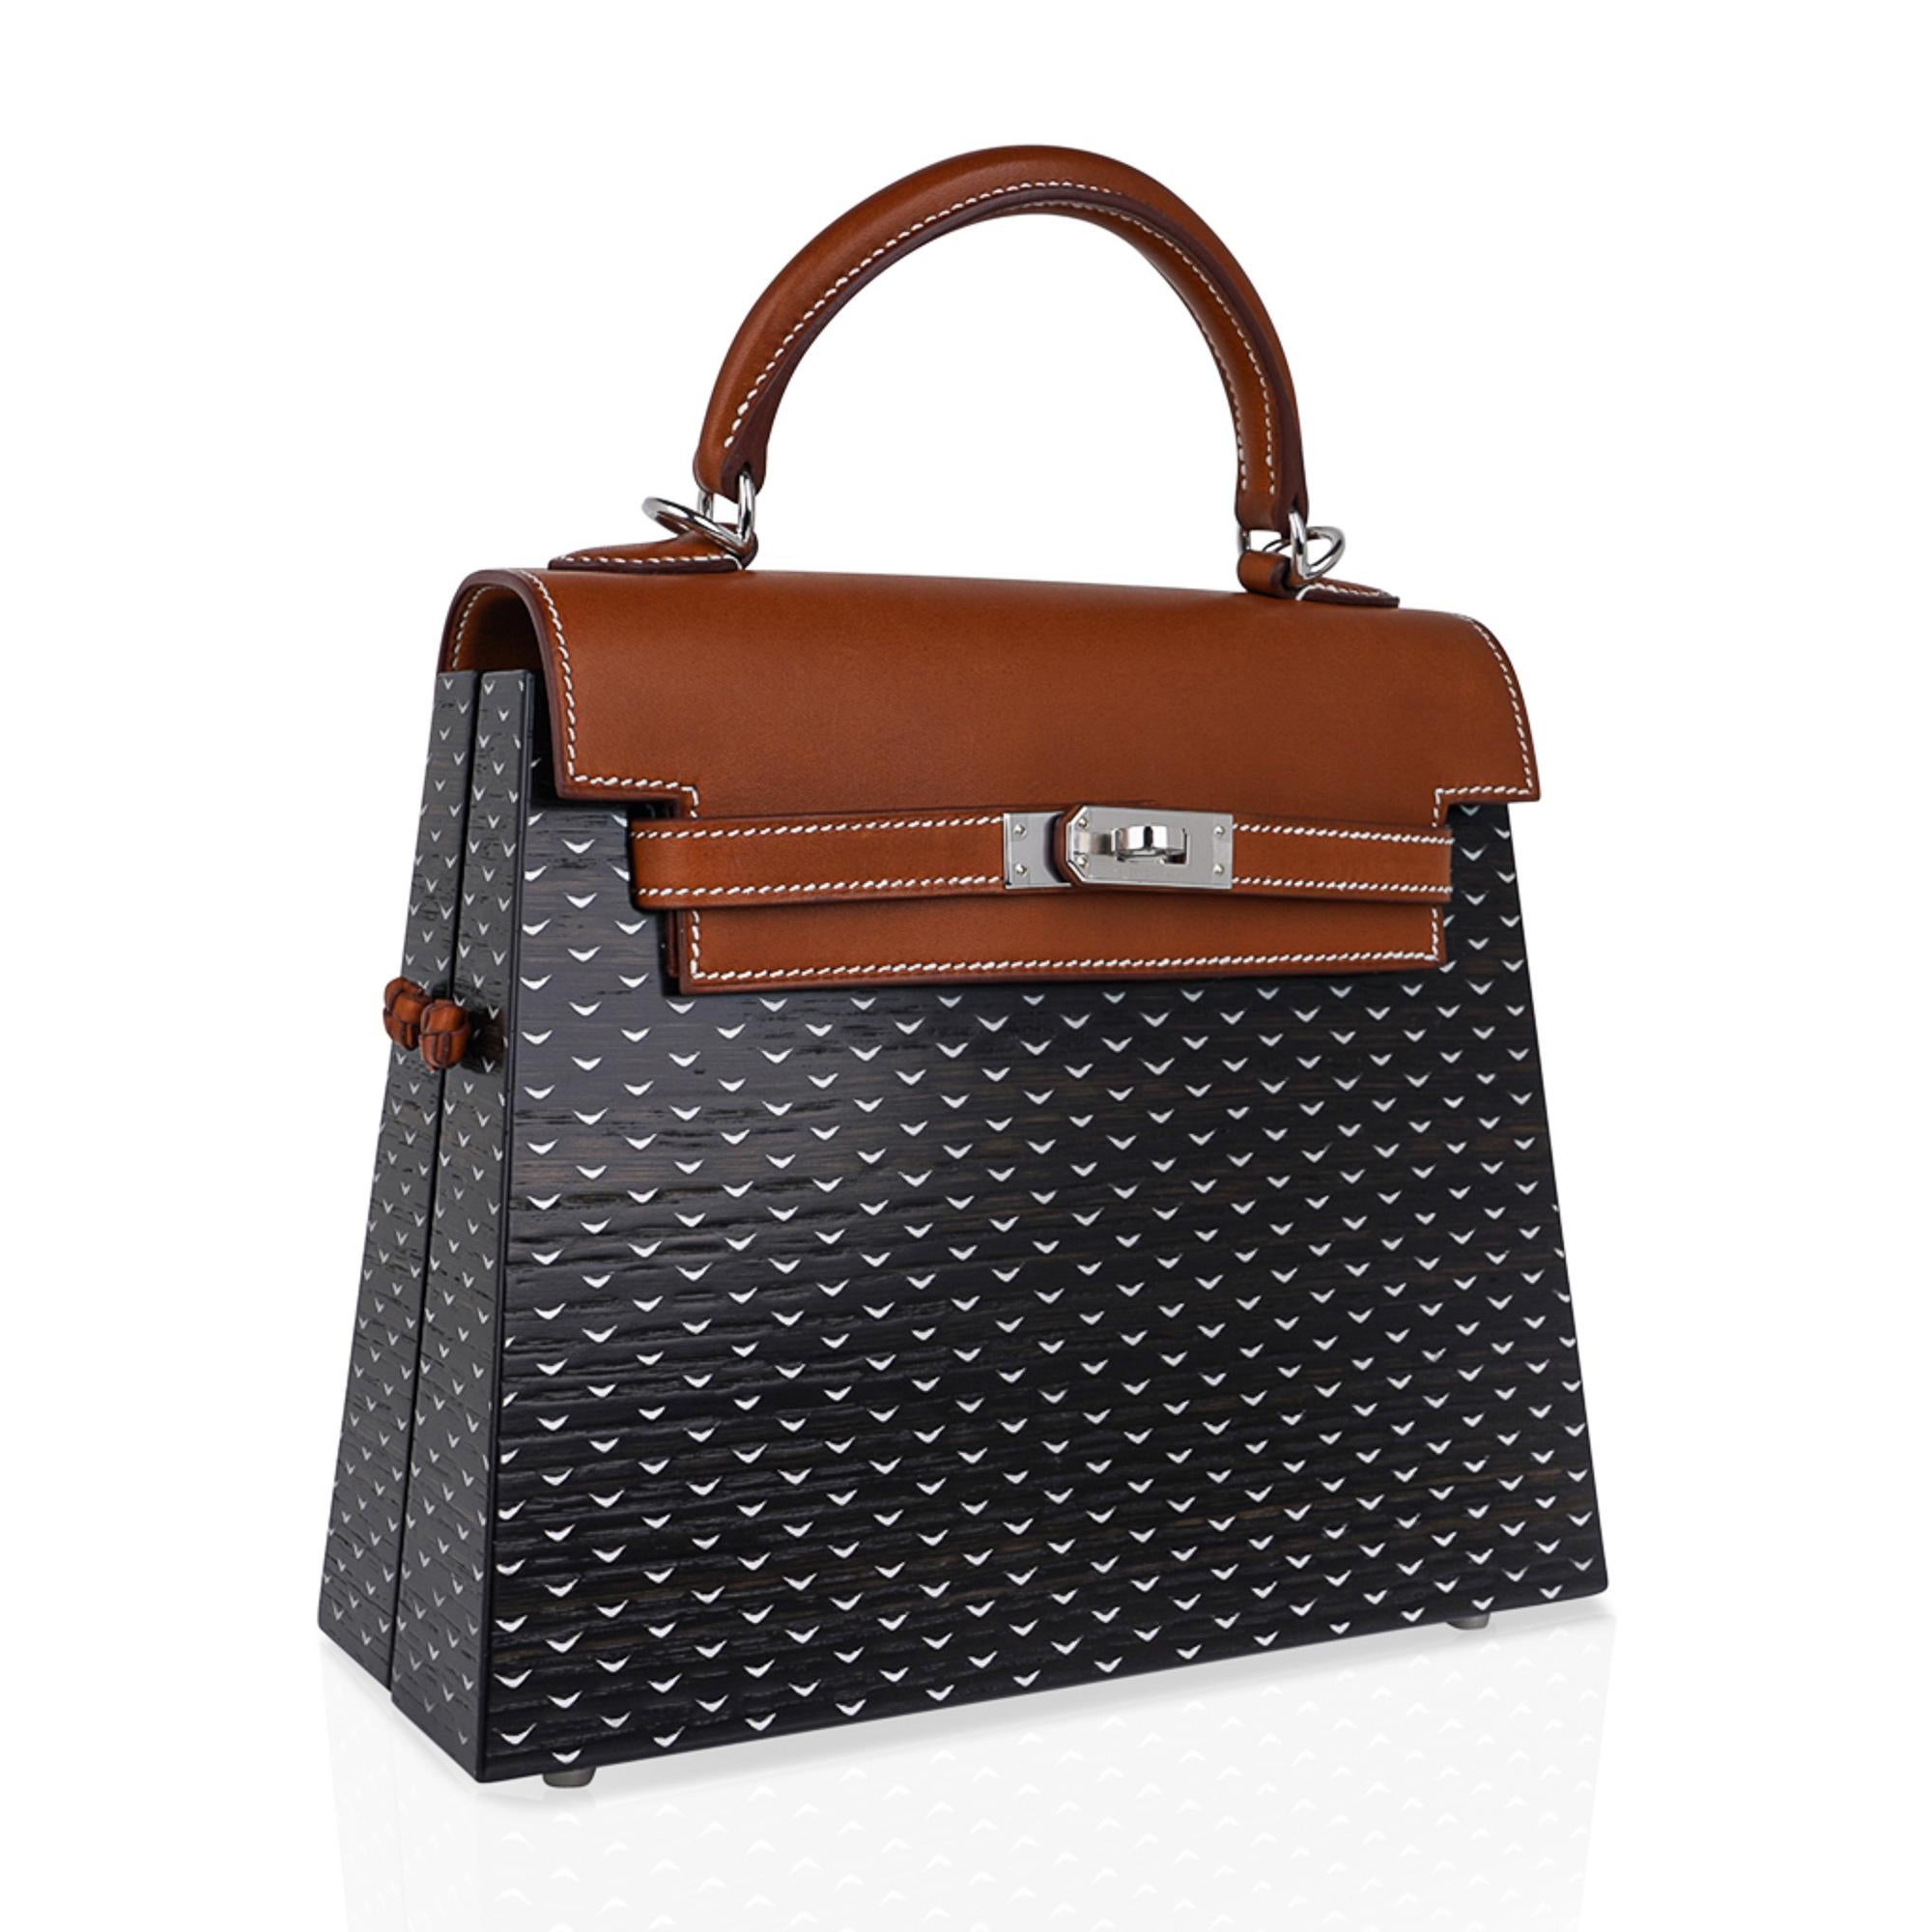 Mightychic offers an exquisite limited edition Hermes Kellywood 